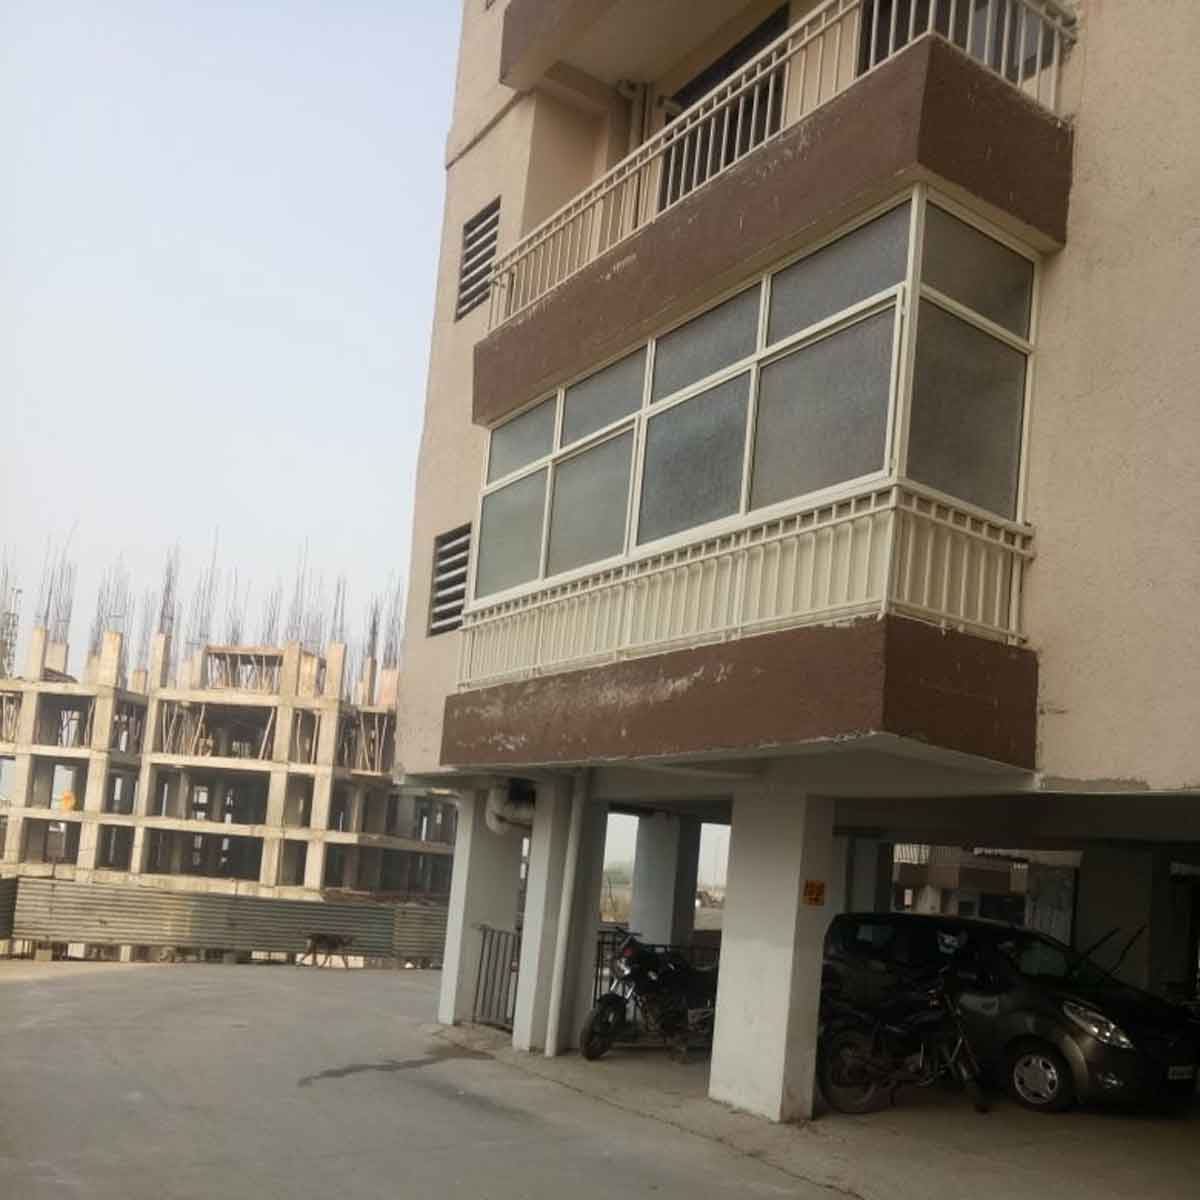 UPVC Aluminium Balcony Covering Manufacturers, Suppliers in Bhuj